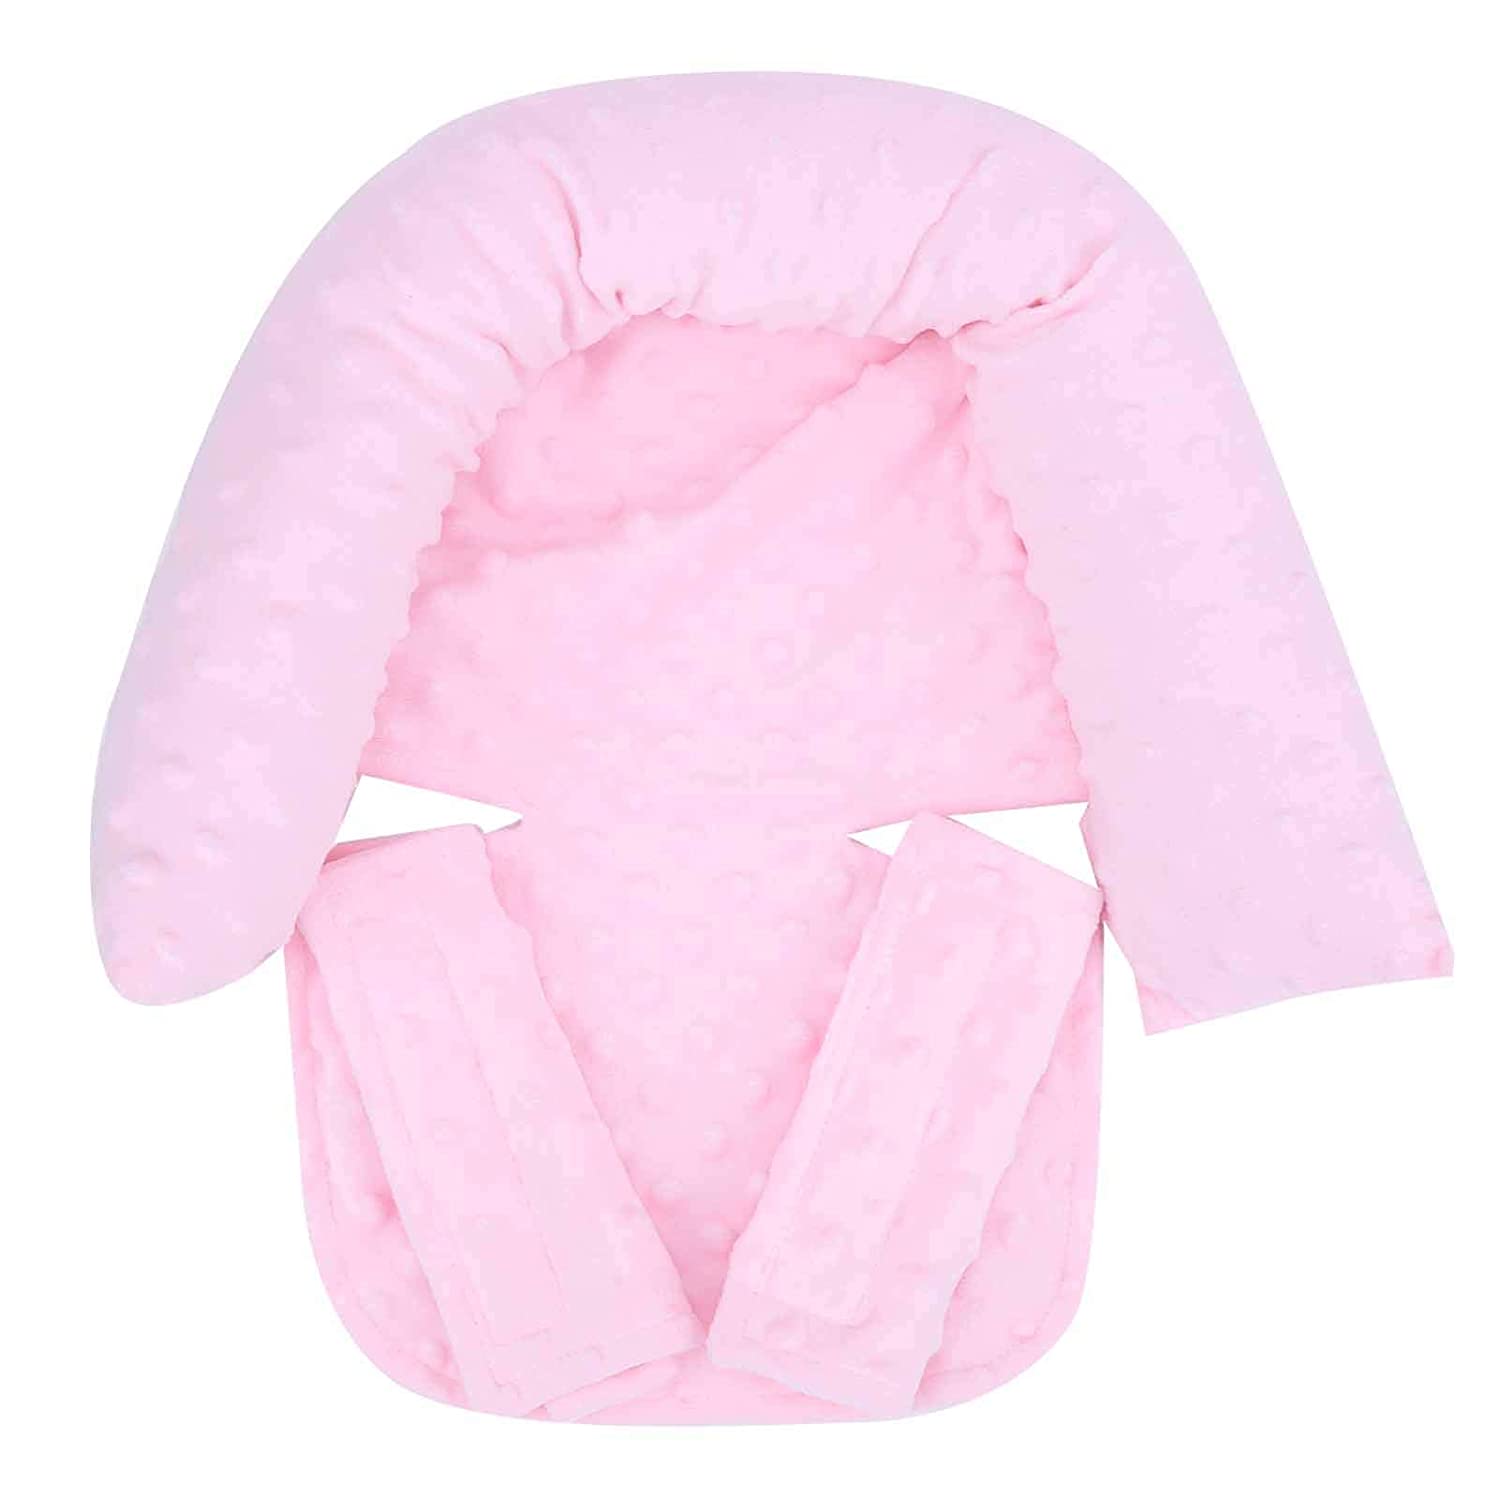 SALUTUYA Baby Head Neck Body Support Pillow Comfortable Thickened Baby Stroller Cushion Newborn Extra Soft Car Insert Pillow Perfect for (Light Pink, Baby Headrest)